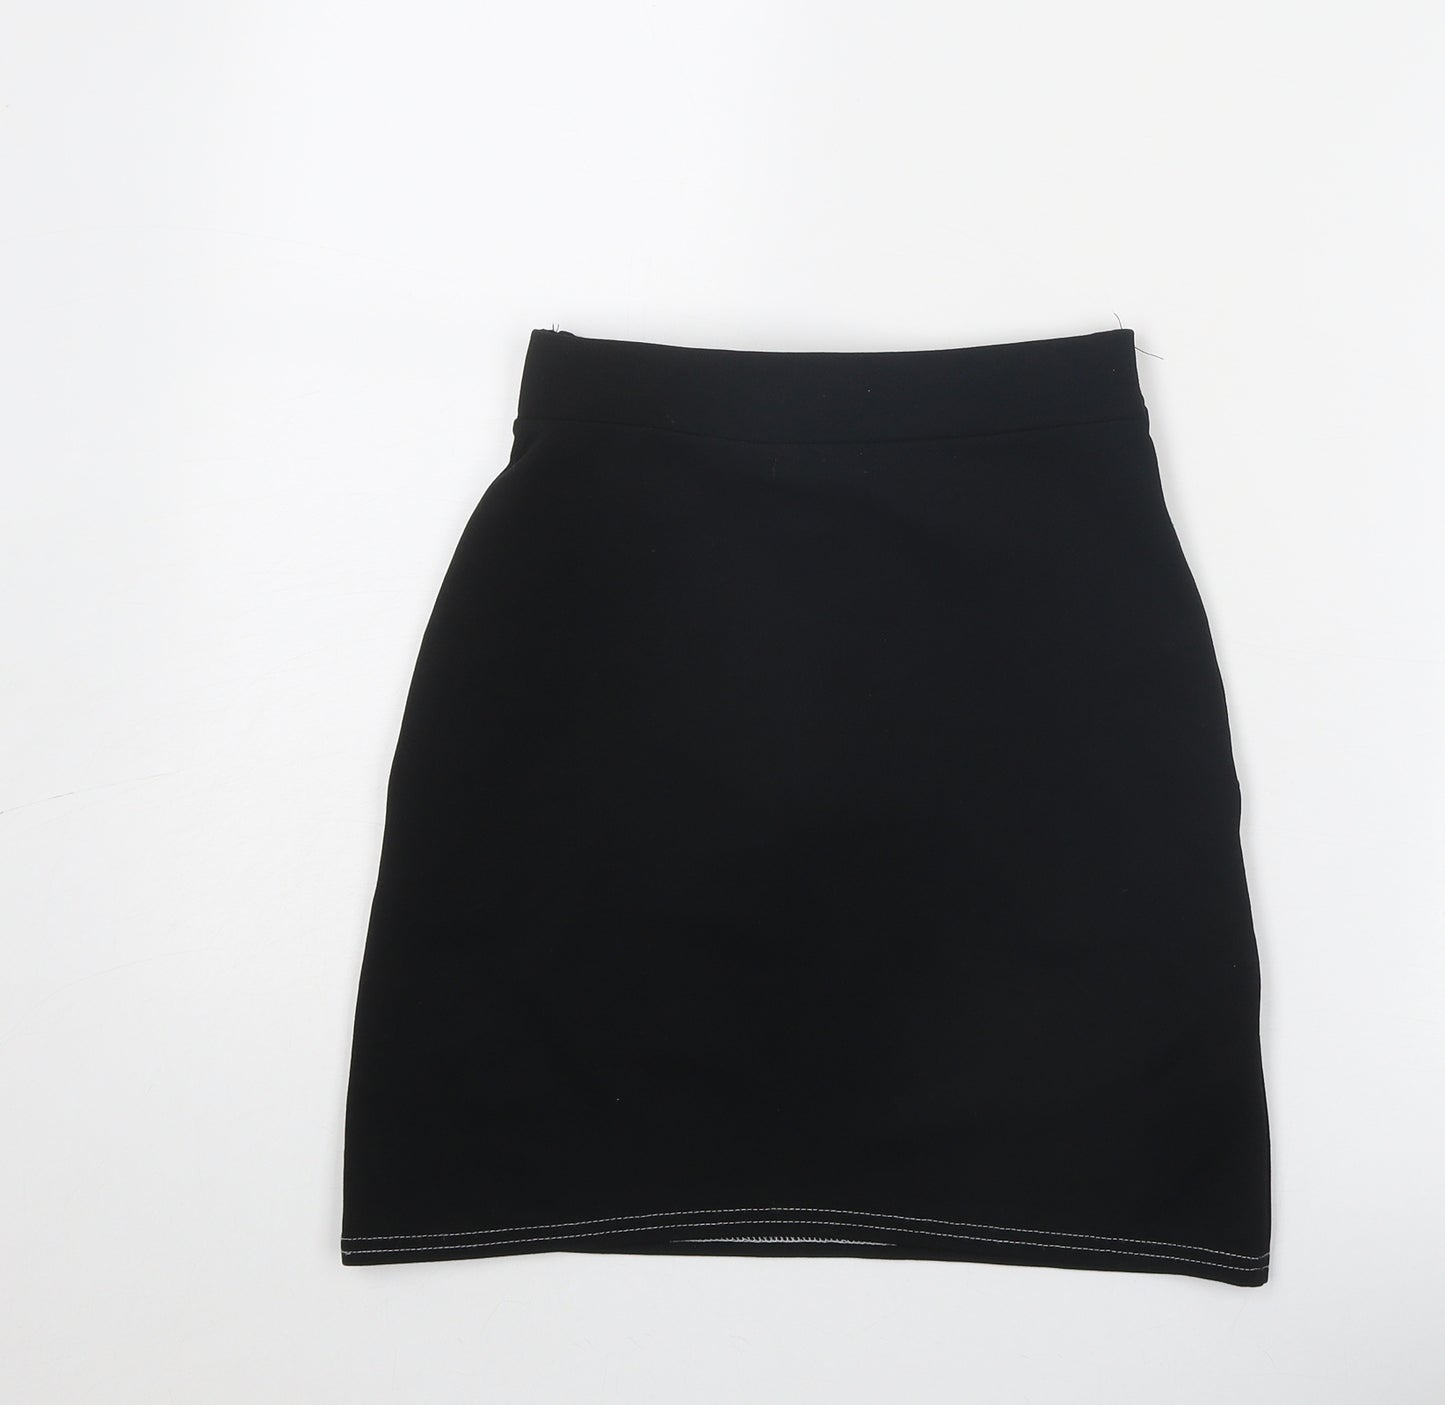 PRETTYLITTLETHING Womens Black Polyester A-Line Skirt Size 8 Tie